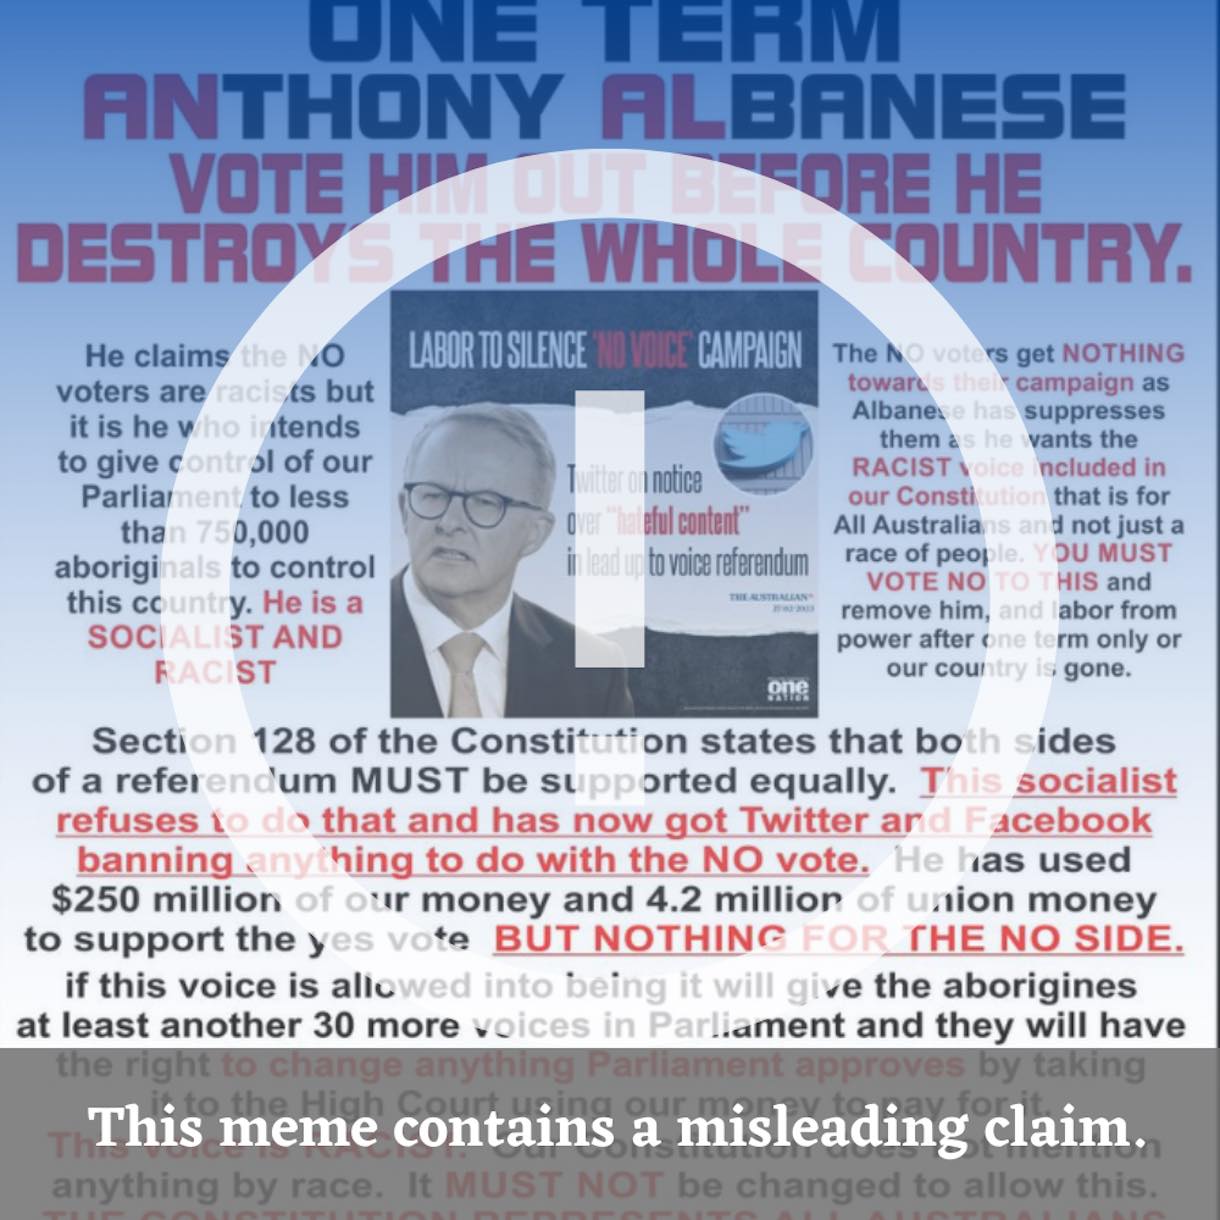 reproduction of a text heavy meme with a photo of anthony albanese arguing that the 'no' voice campaign is being treated unfairly.  the text 'this meme contains a misleading claim' is superimposed.